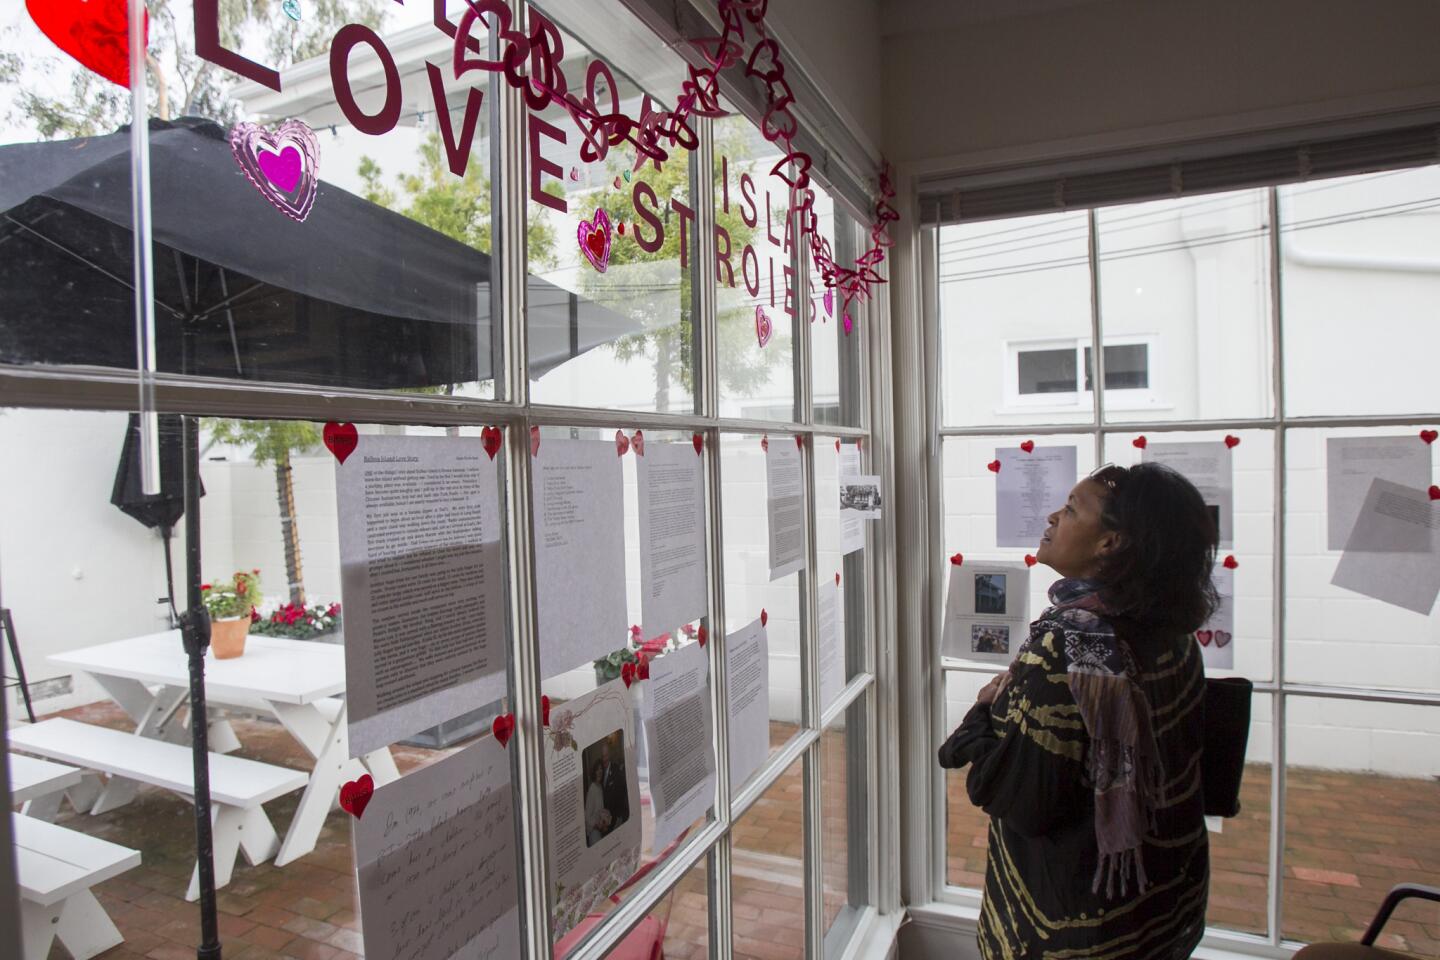 Shirley Jordan looks at a window covered with love stories about Balboa Island at the Balboa Island Museum & Historical Society on Saturday, February 15. (Scott Smeltzer, Daily Pilot)